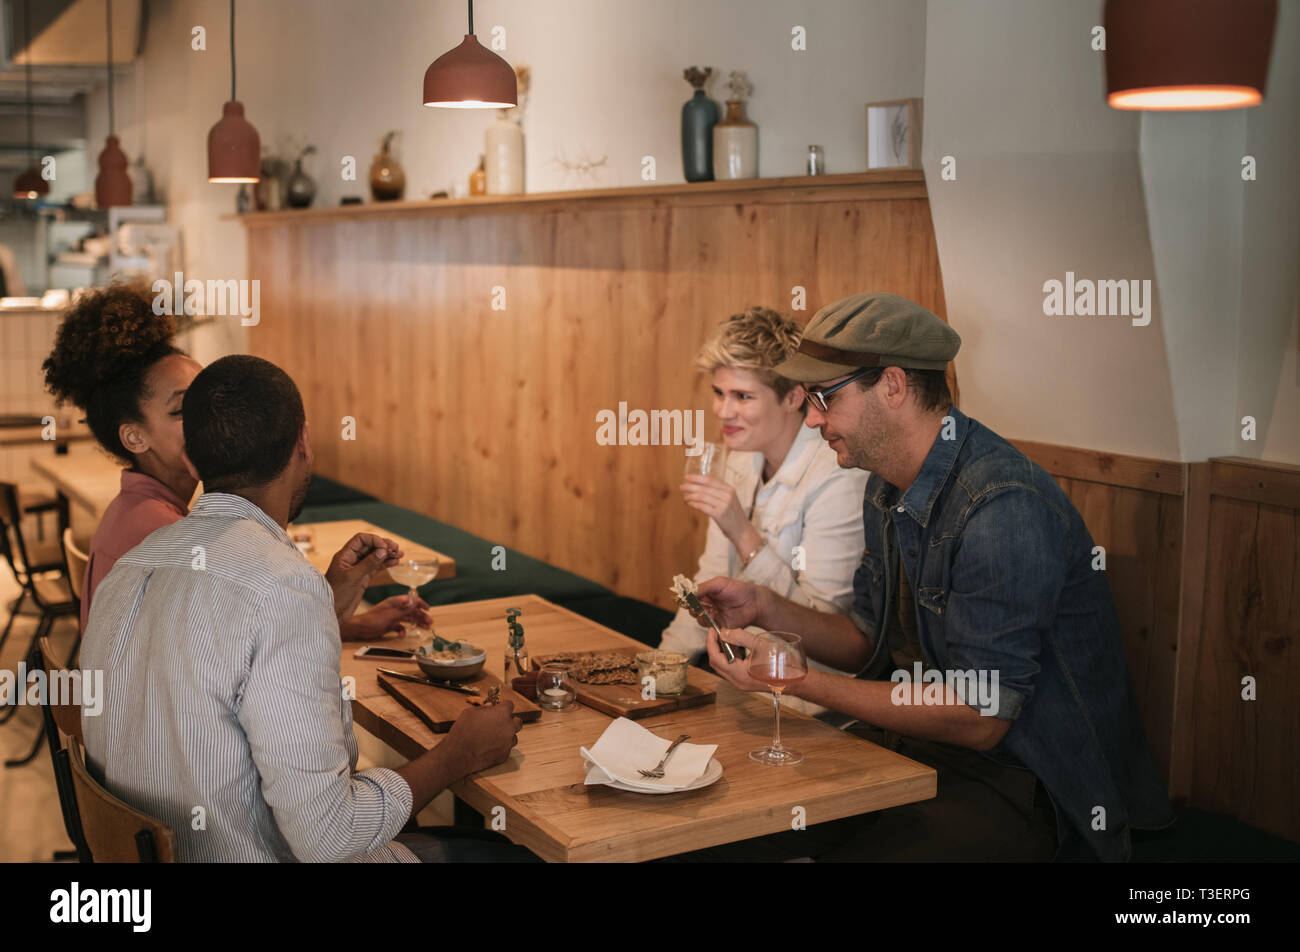 Content friends sharing food together in a bar Stock Photo